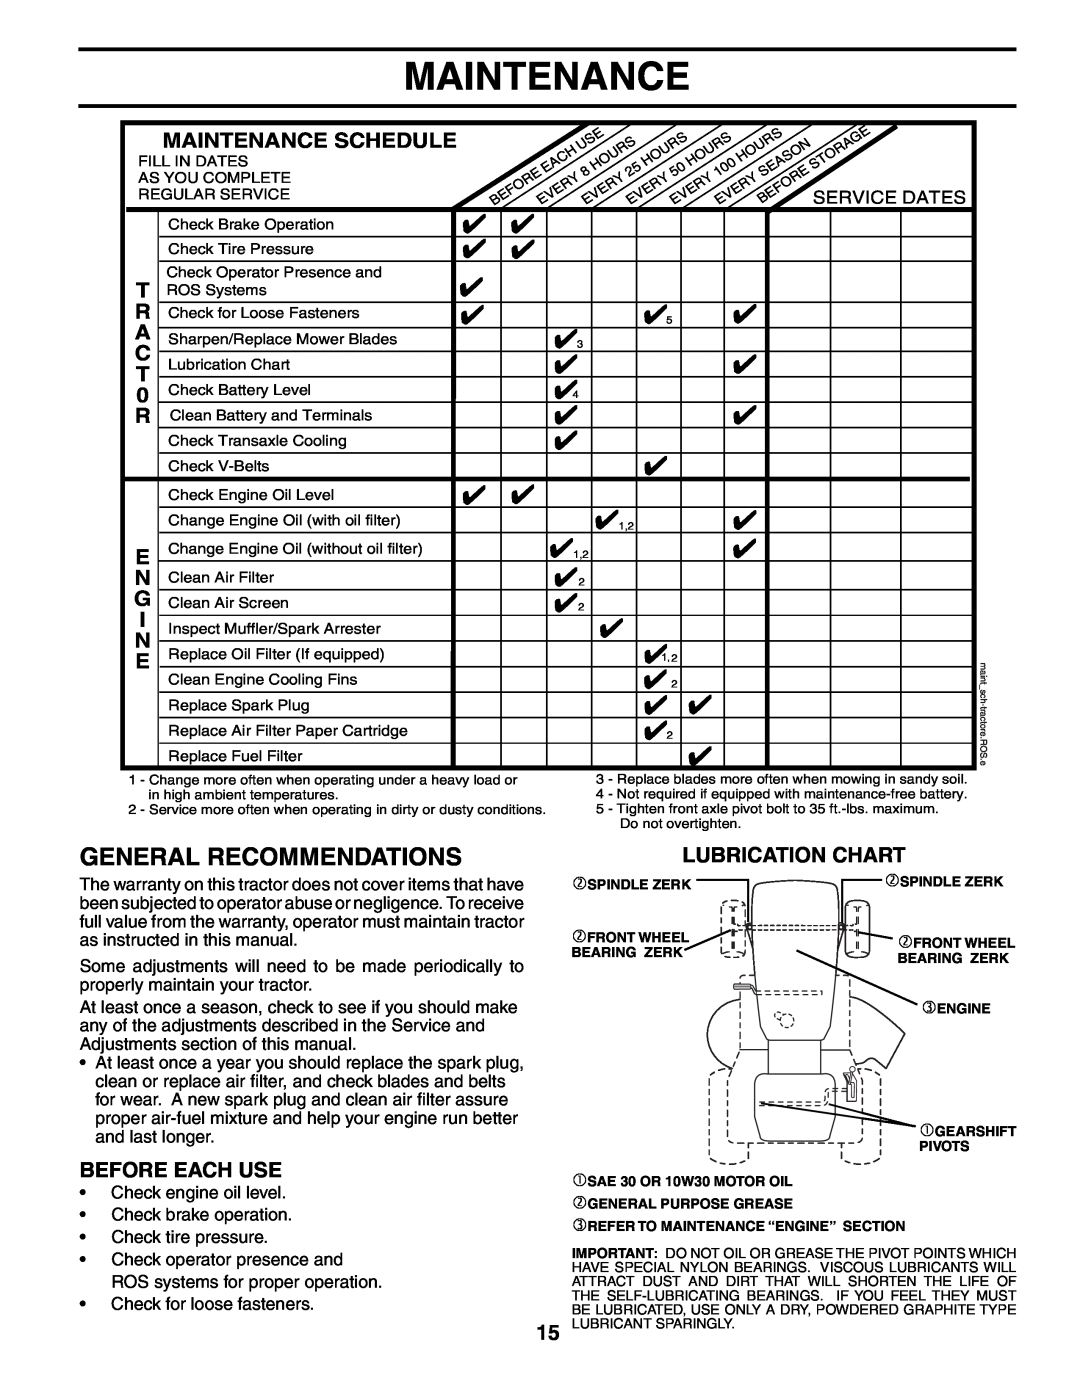 Weed Eater 195383 manual General Recommendations, Before Each Use, Lubrication Chart, Maintenance Schedule 